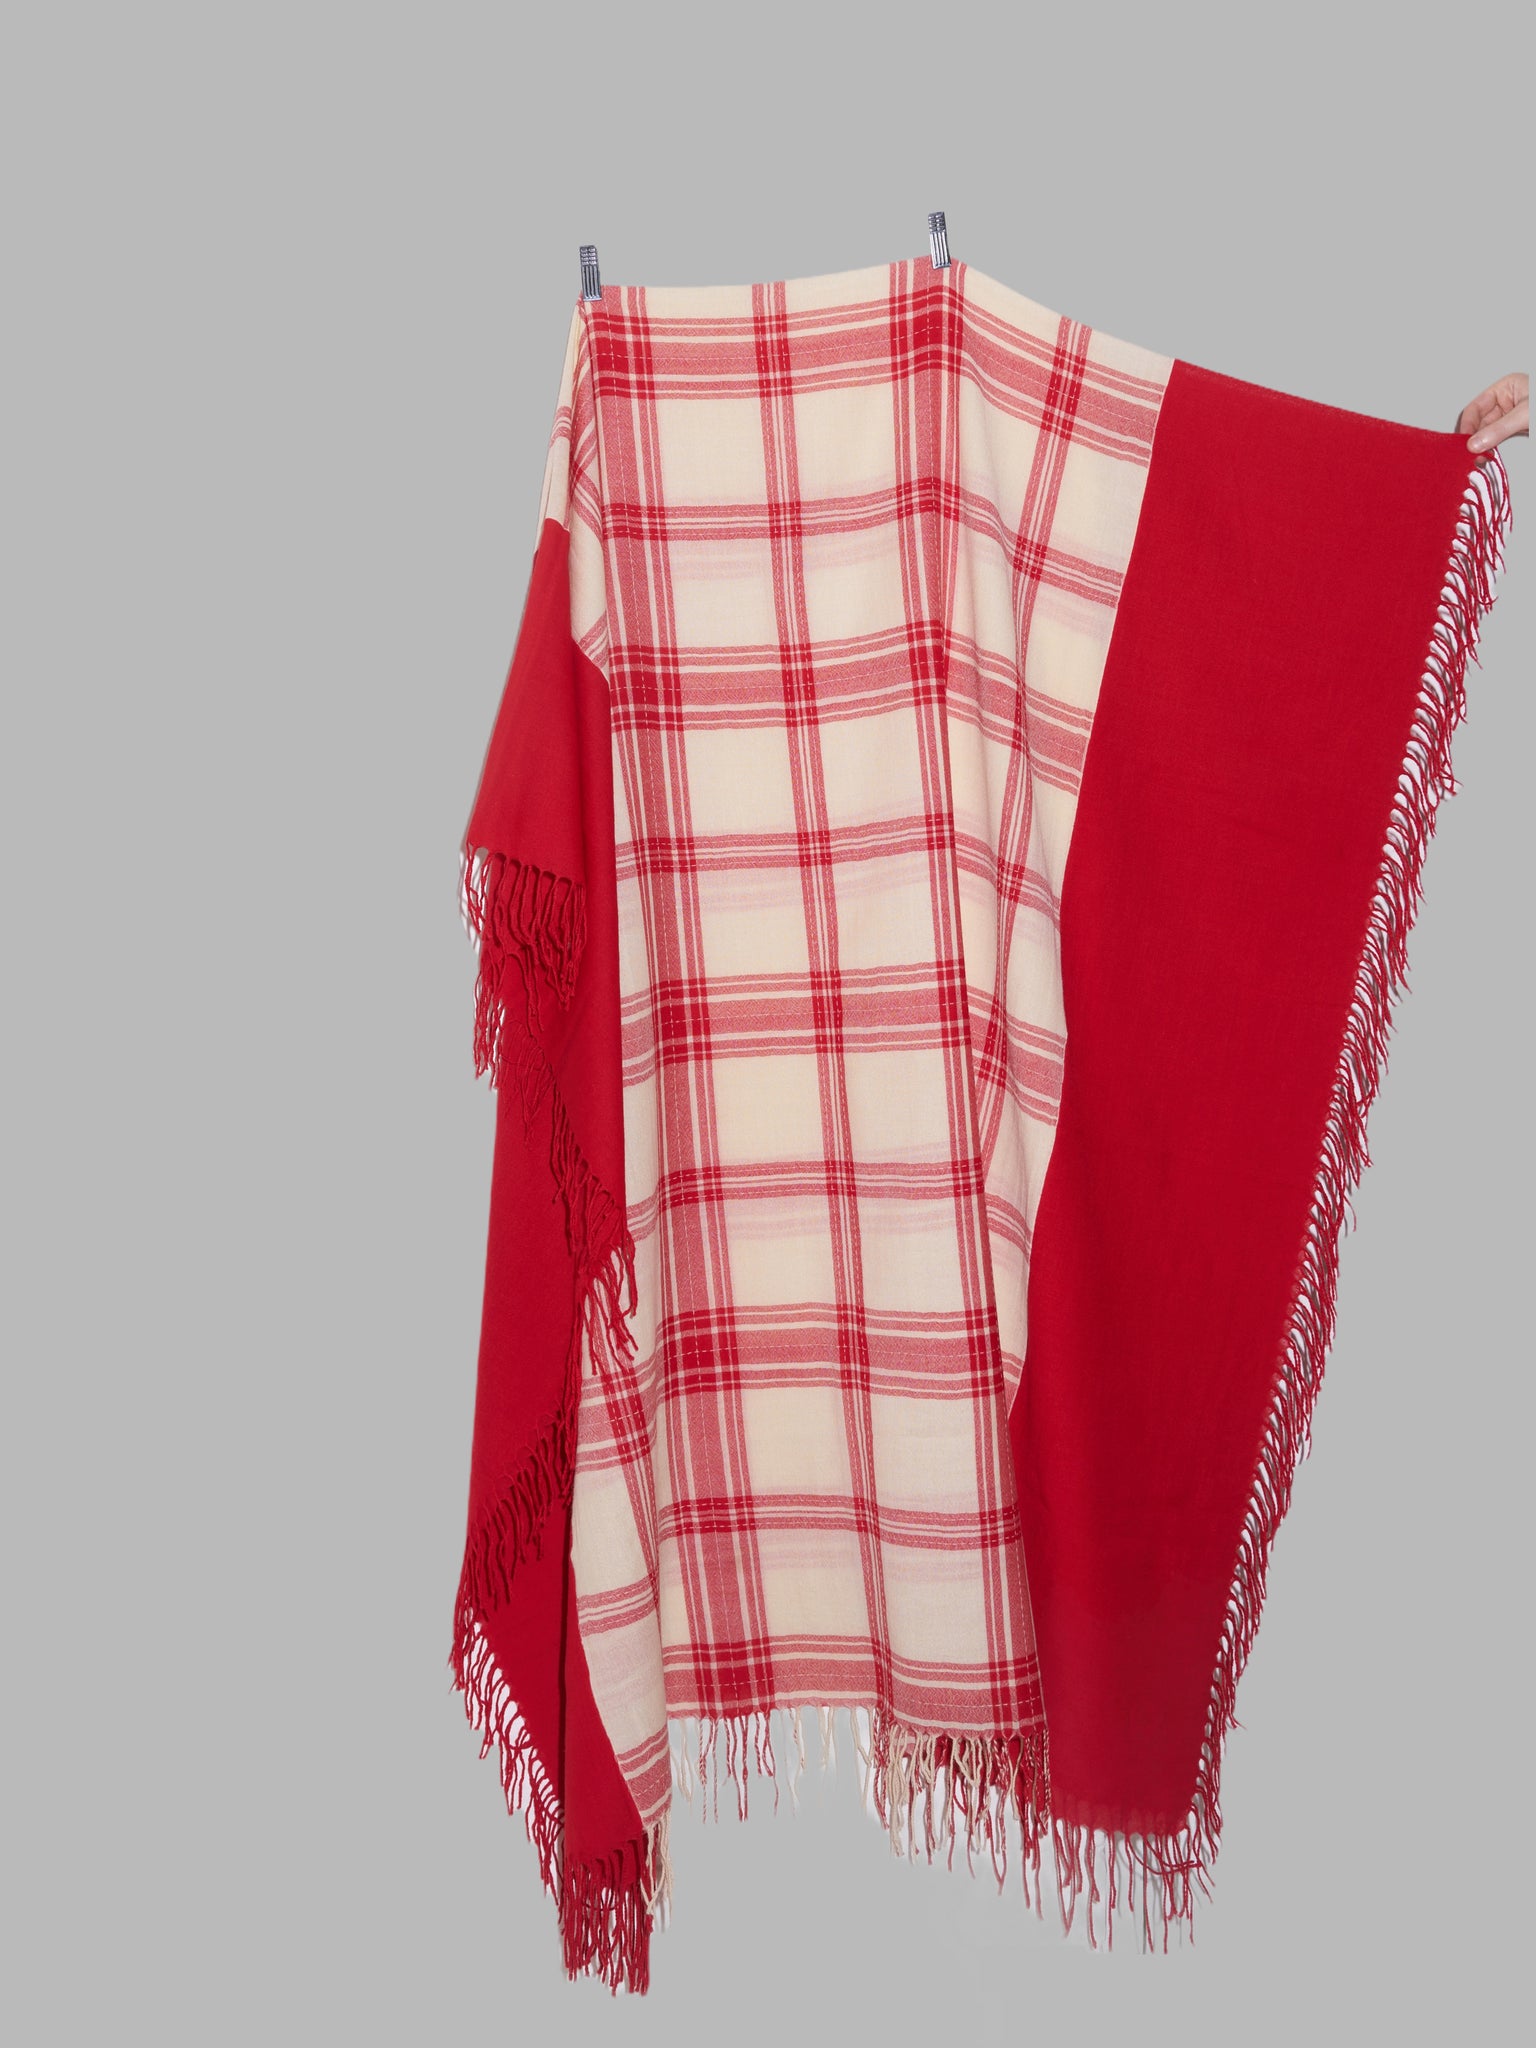 Tricot Comme des Garcons 1991 huge red cream plaid wool shawl scarf